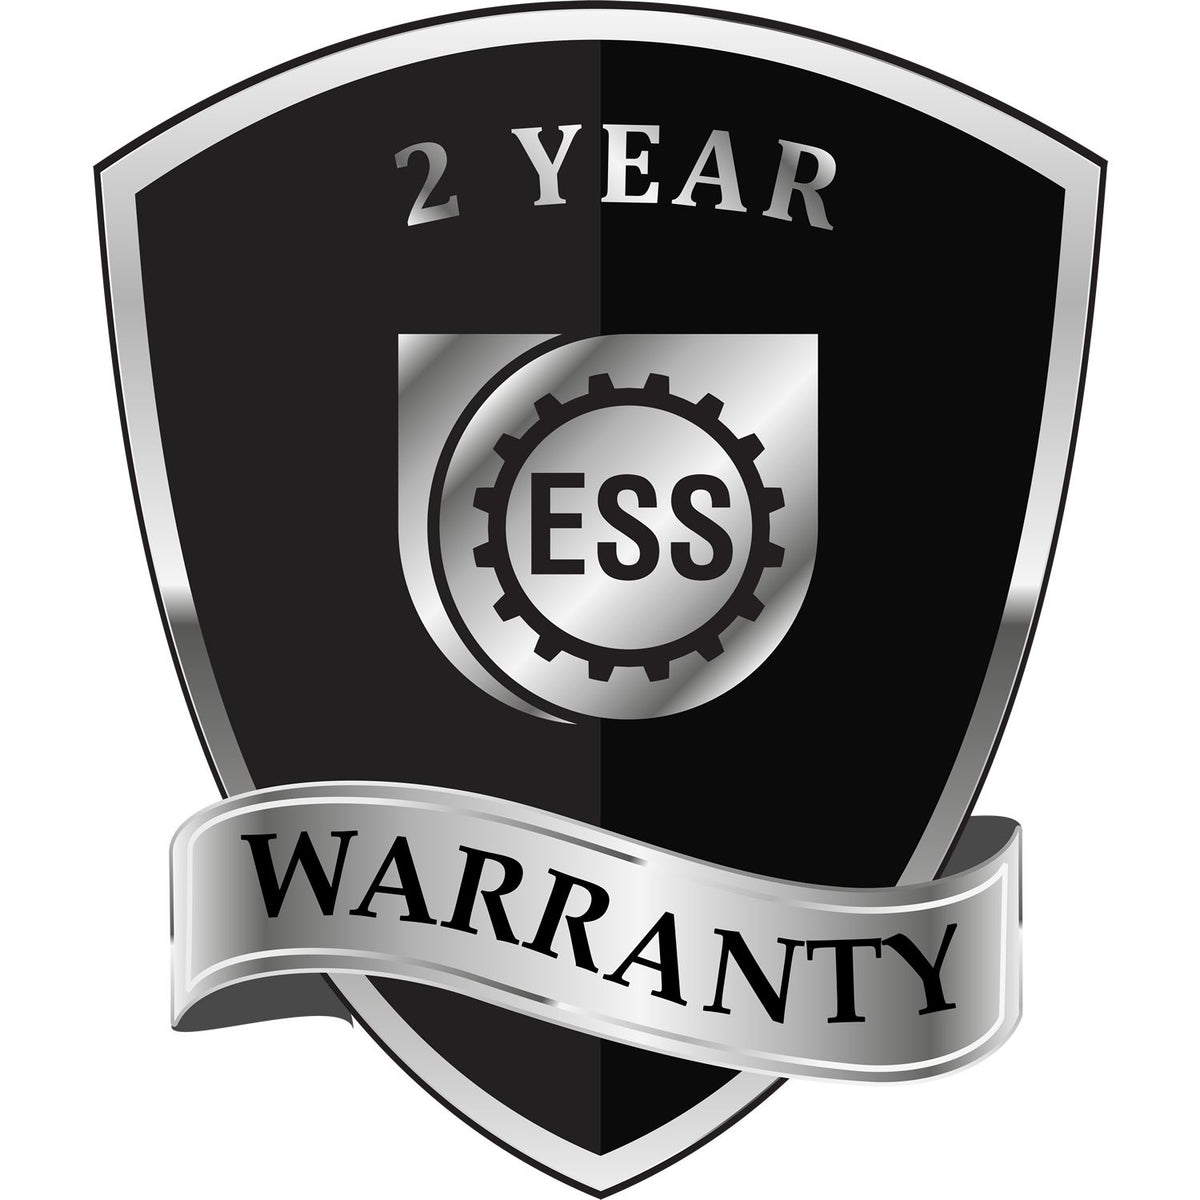 A badge or emblem showing a warranty icon for the Soft Ohio Professional Engineer Seal